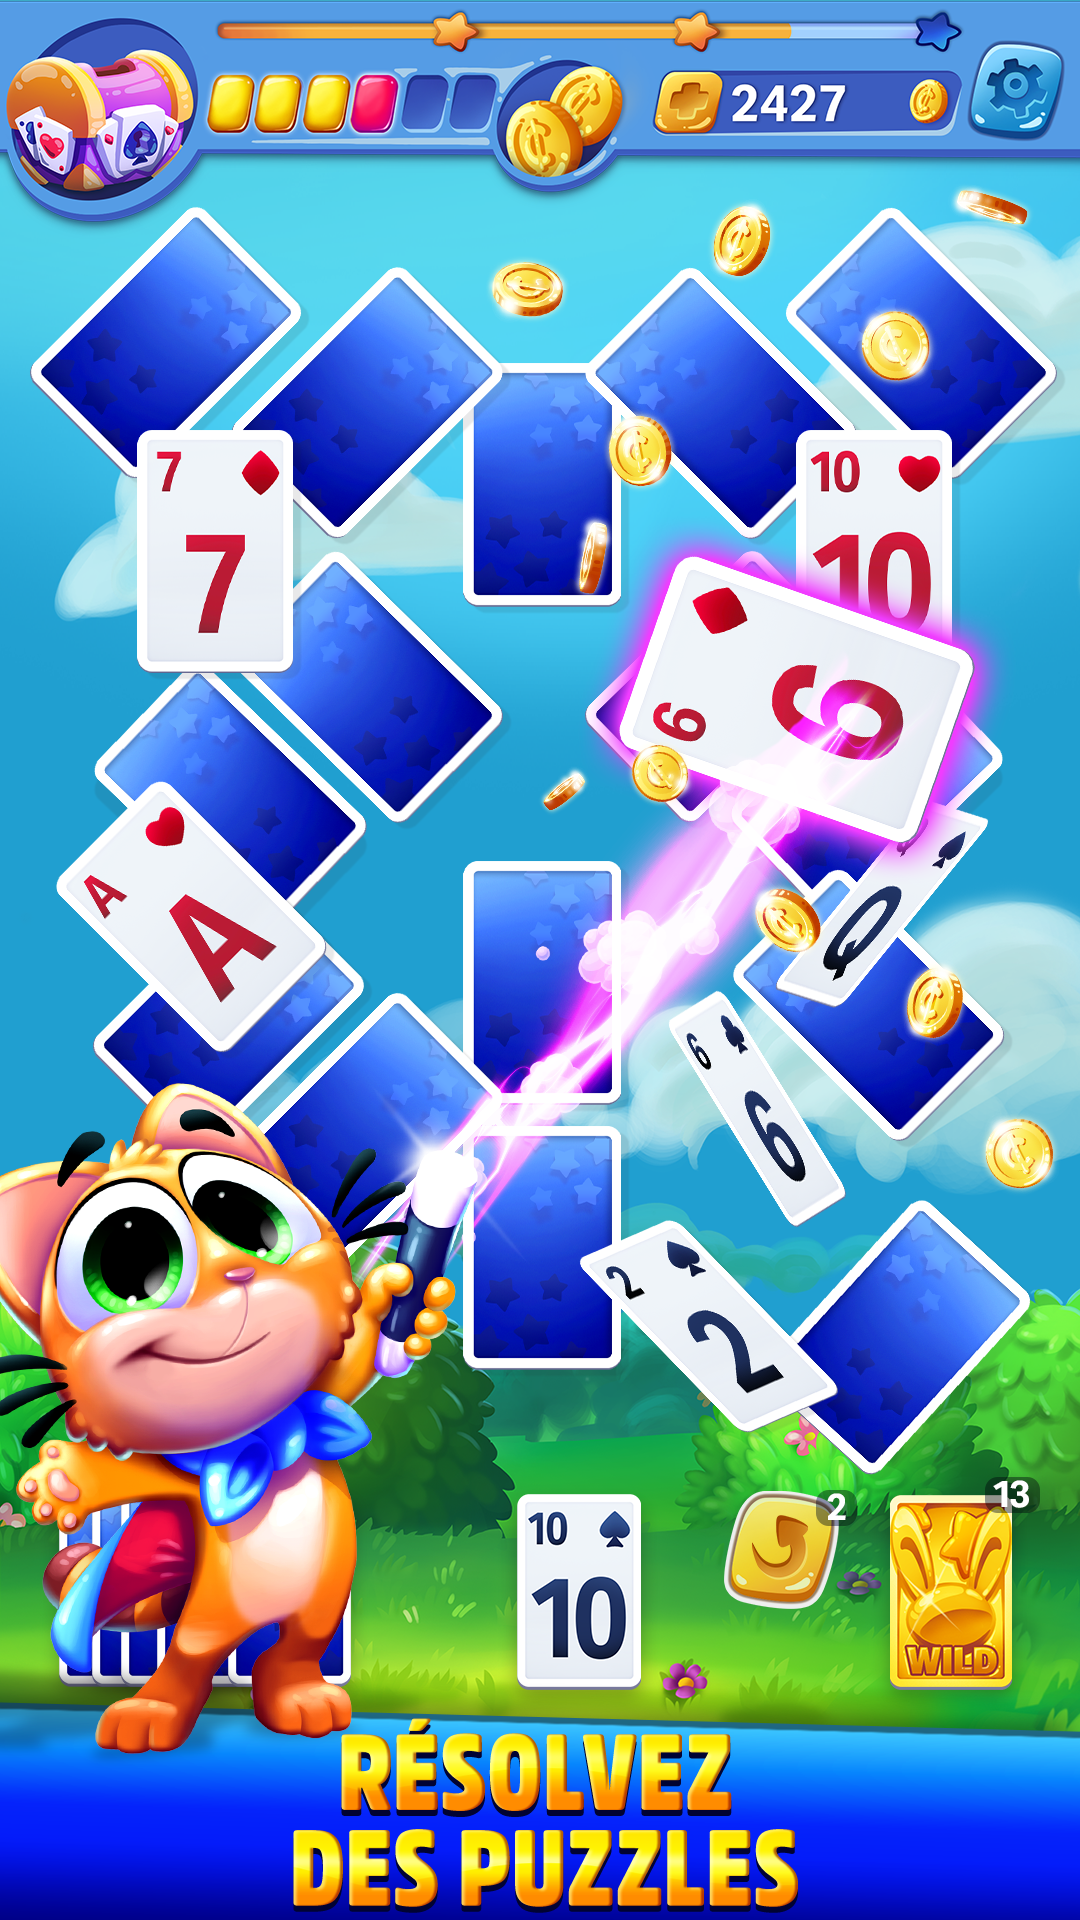 Screenshot 1 of Solitaire Showtime 26.2.0